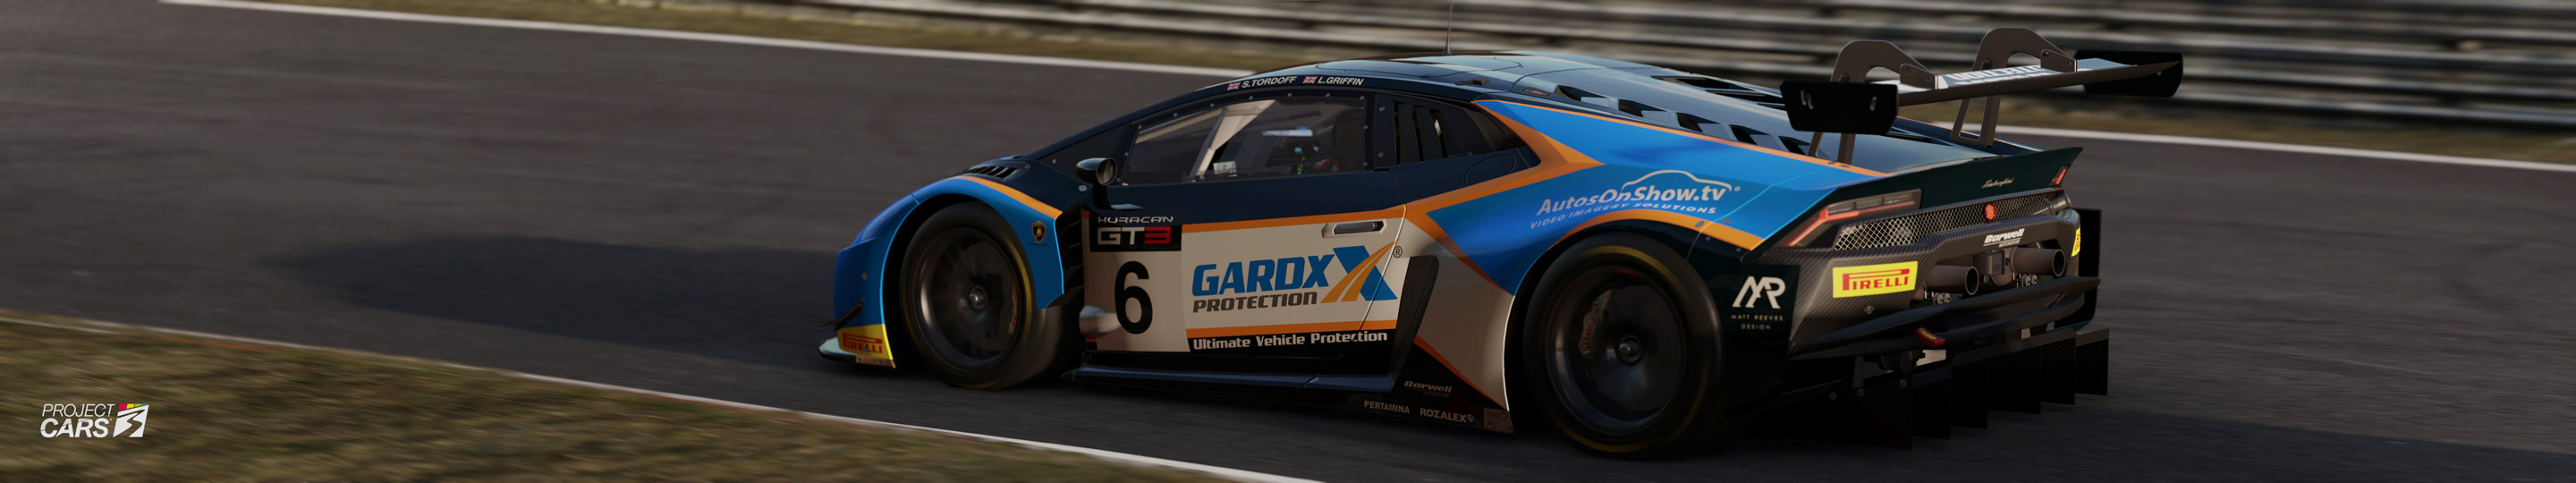 6 PROJECT CARS 3 GT3 at NORDSCHLEIFE copy.jpg